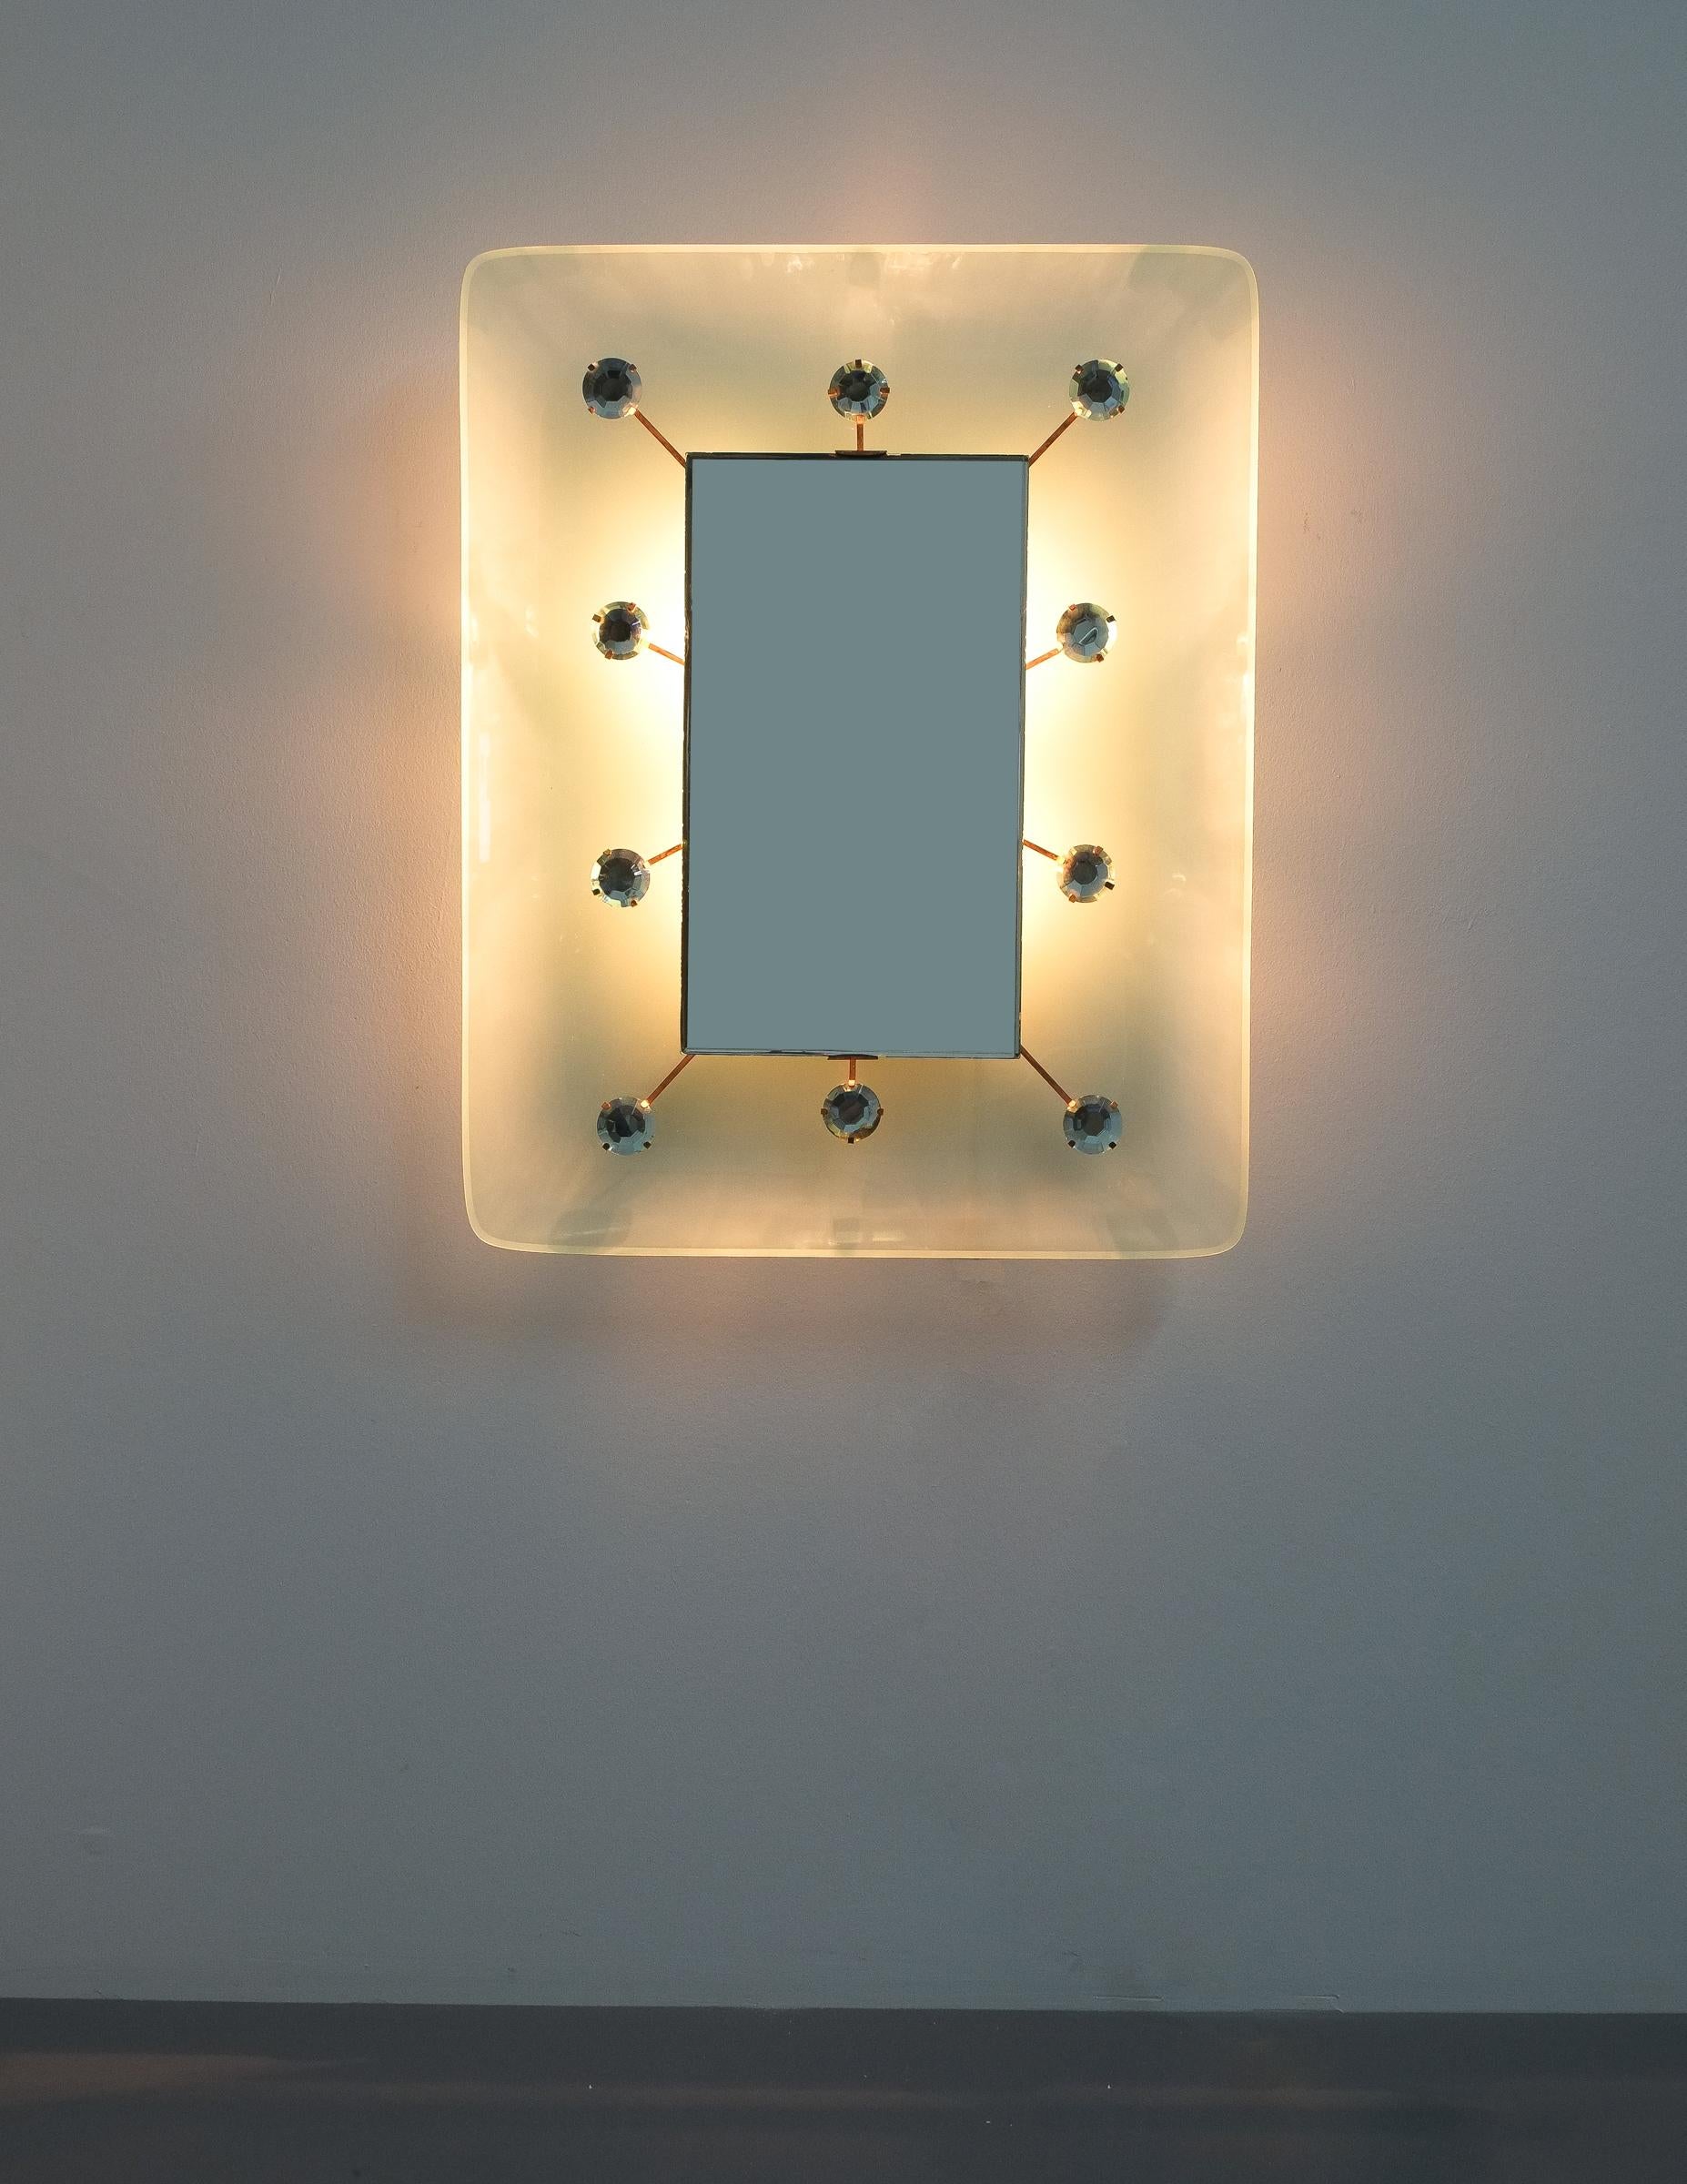 Rare bespoke version of the jewel-cut backlit mirror by Max Ingrand (attributed) in wonderful condition

Illuminated mirror, Italy, circa 1960. 31 x 24“ mirror with a thick smooth blue-ish glass frame, back-plate and diamond cabochon cut-glass